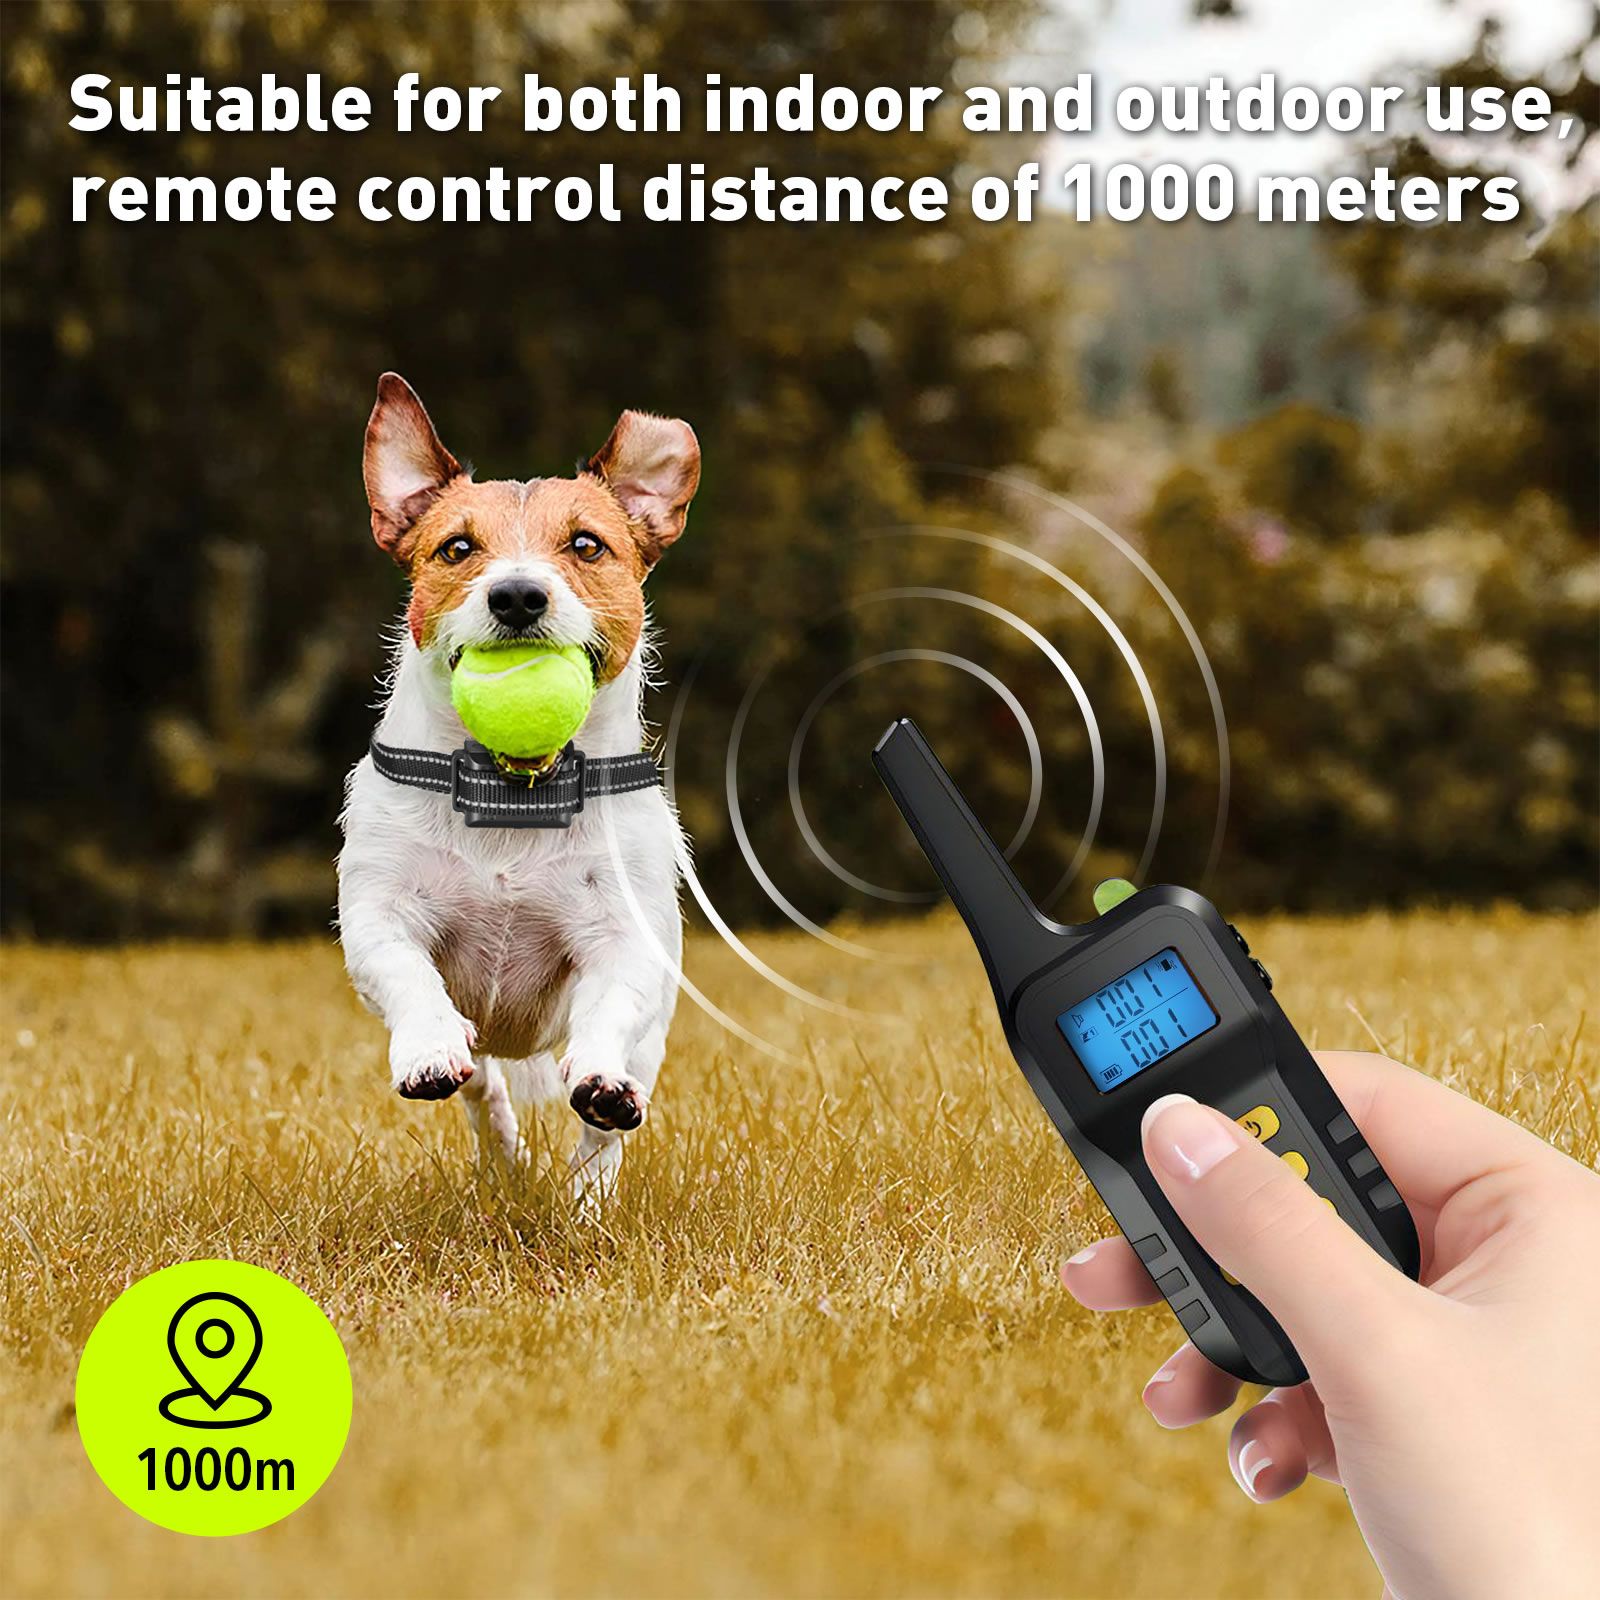 Dog Training Collar Remote Control 1000M Anti Bark Clicker Vibration Pet Obedience Correction Trainer Auto Stop Barking Safe Waterproof